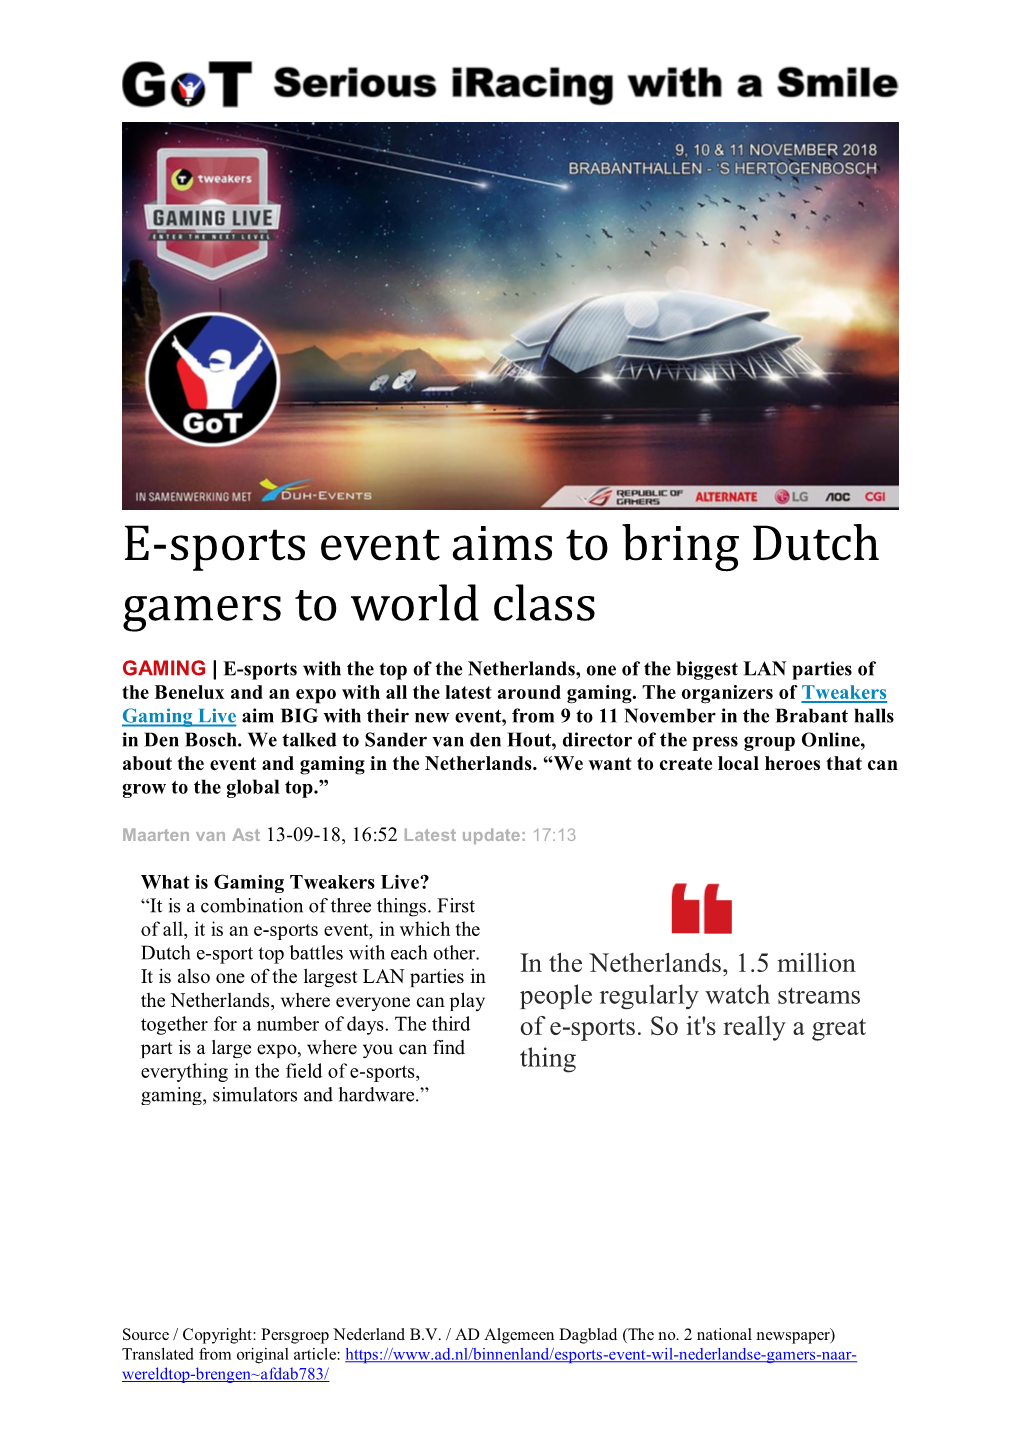 E-Sports Event Aims to Bring Dutch Gamers to World Class